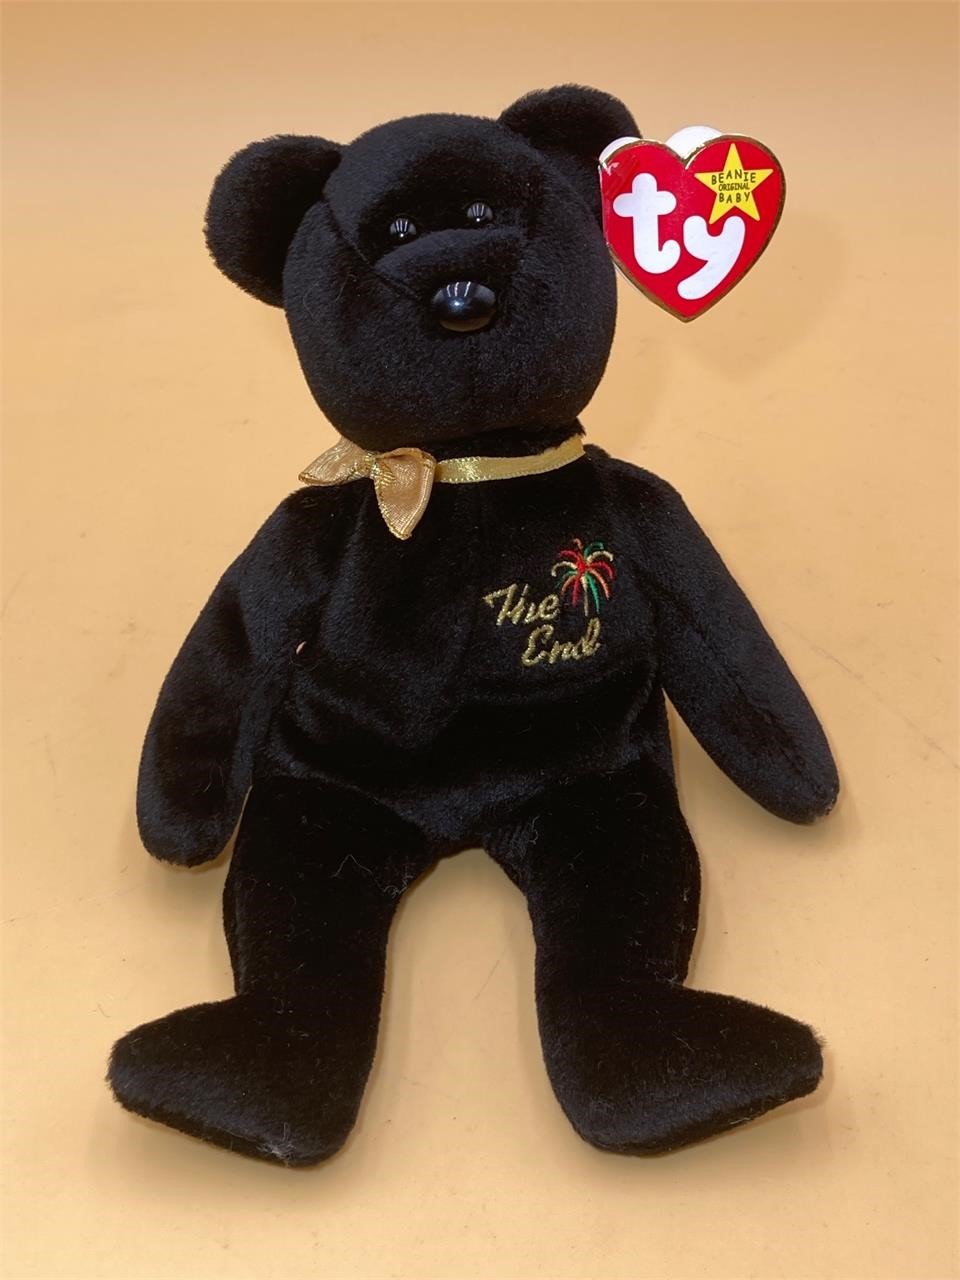 1999 The End Beanie Baby With Errors